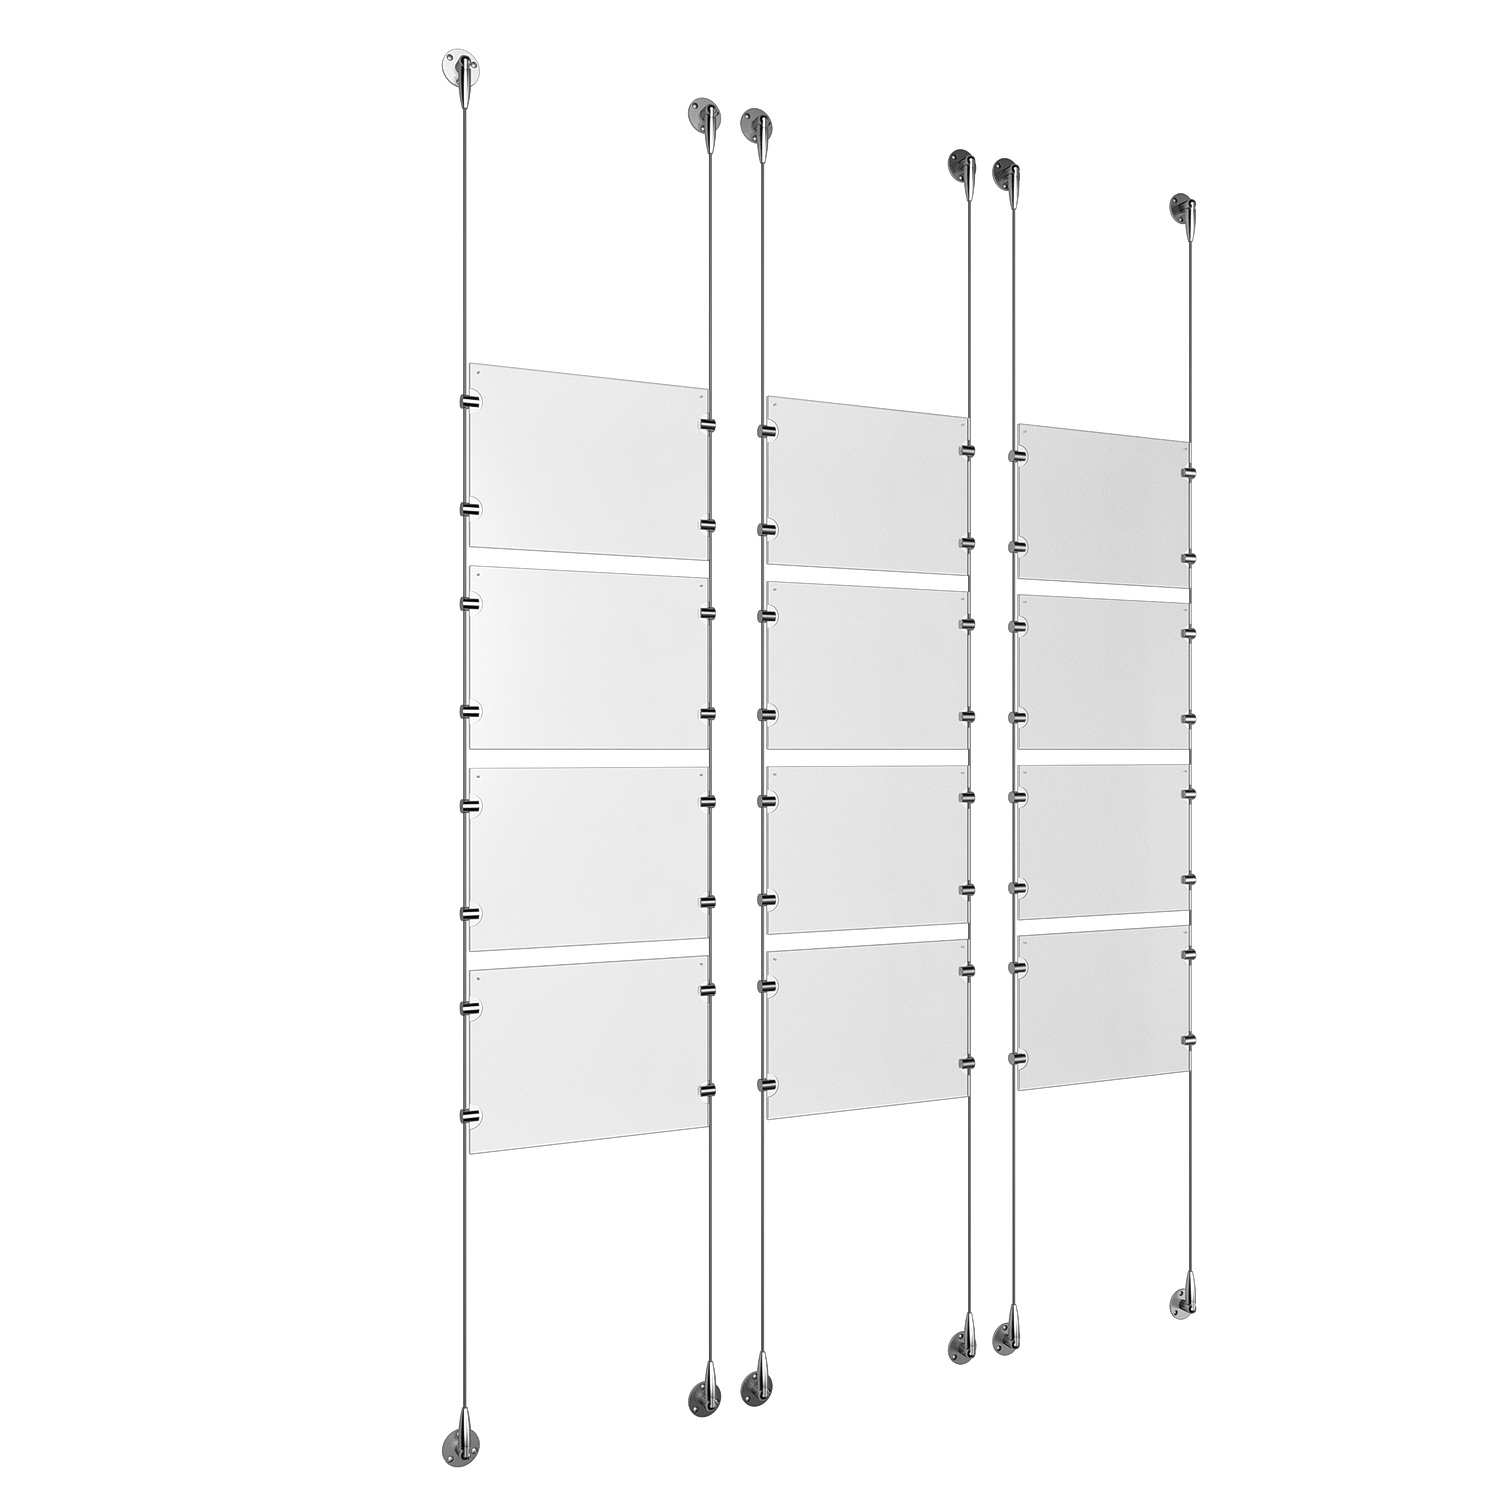 (12) 11'' Width x 8-1/2'' Height Clear Acrylic Frame & (6) Stainless Steel Satin Brushed Adjustable Angle Signature 1/8'' Cable Systems with (48) Single-Sided Panel Grippers